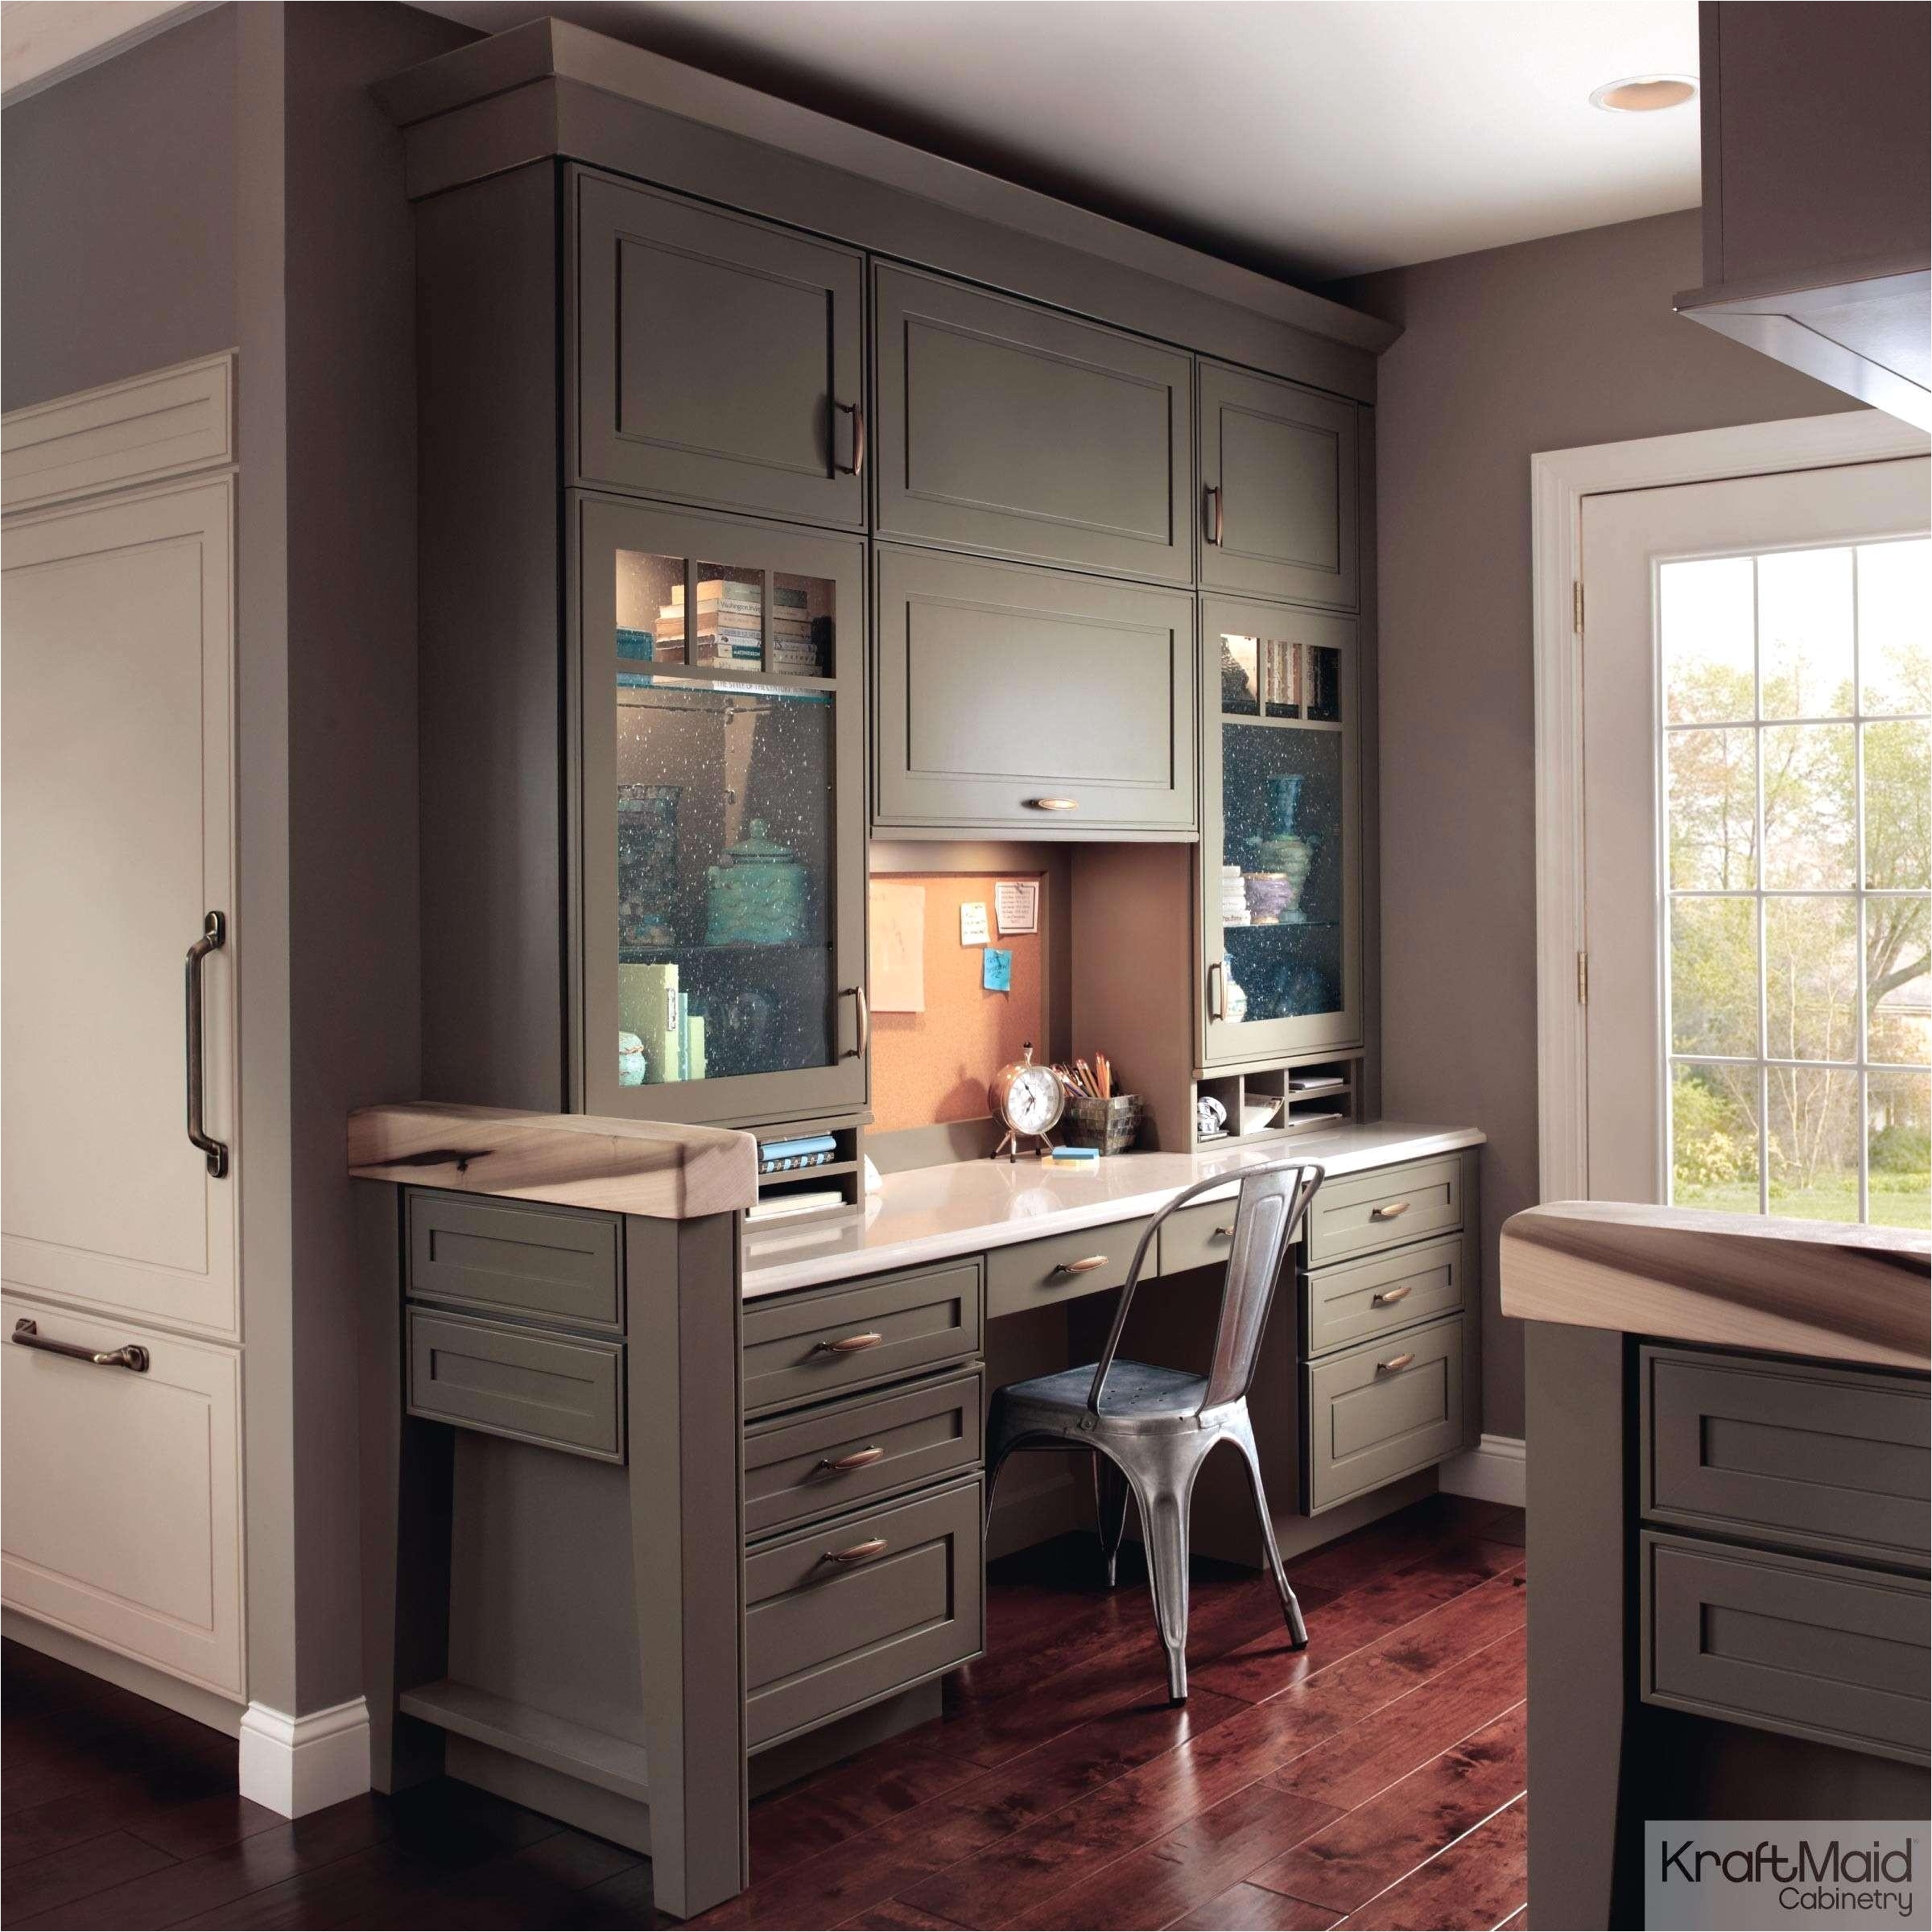 blue cabinets kitchen awesome pickled maple kitchen cabinets awesome kitchen cabinet 0d kitchen